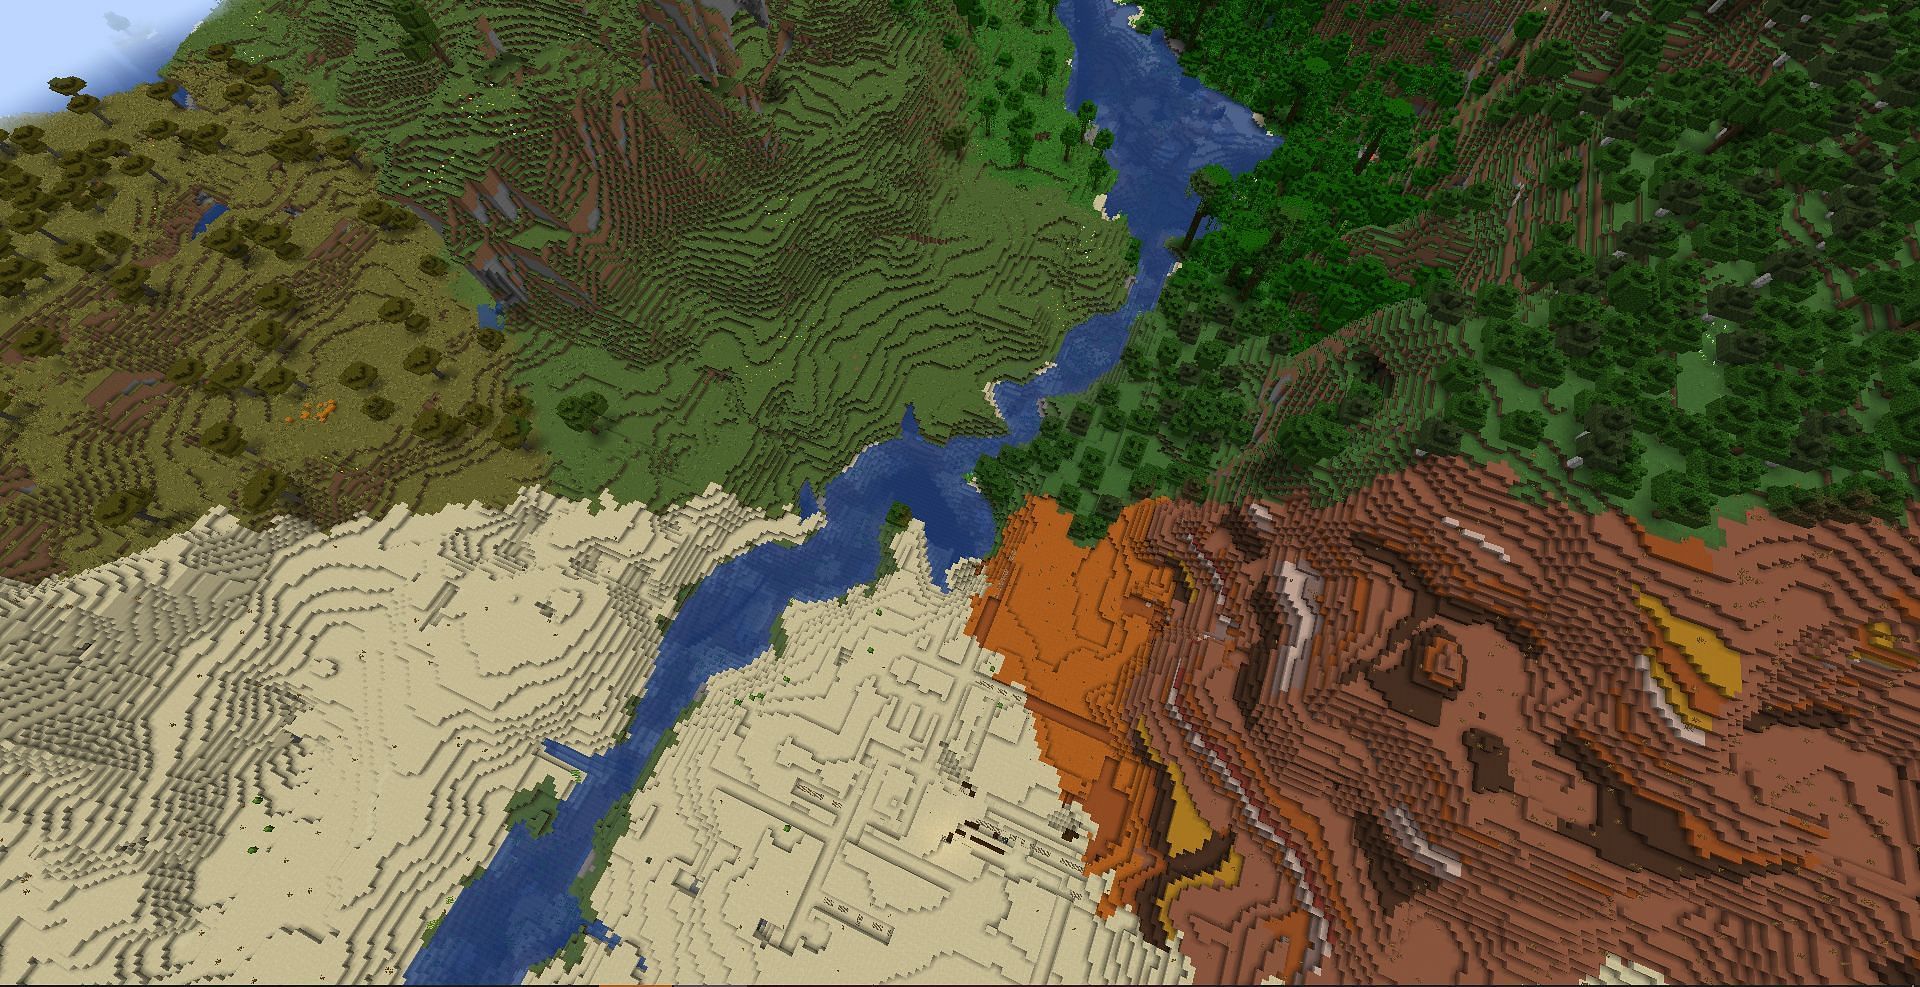 Players will spawn near the middle of four different biomes in this seed (Image via Reddit/LordFyreWall)